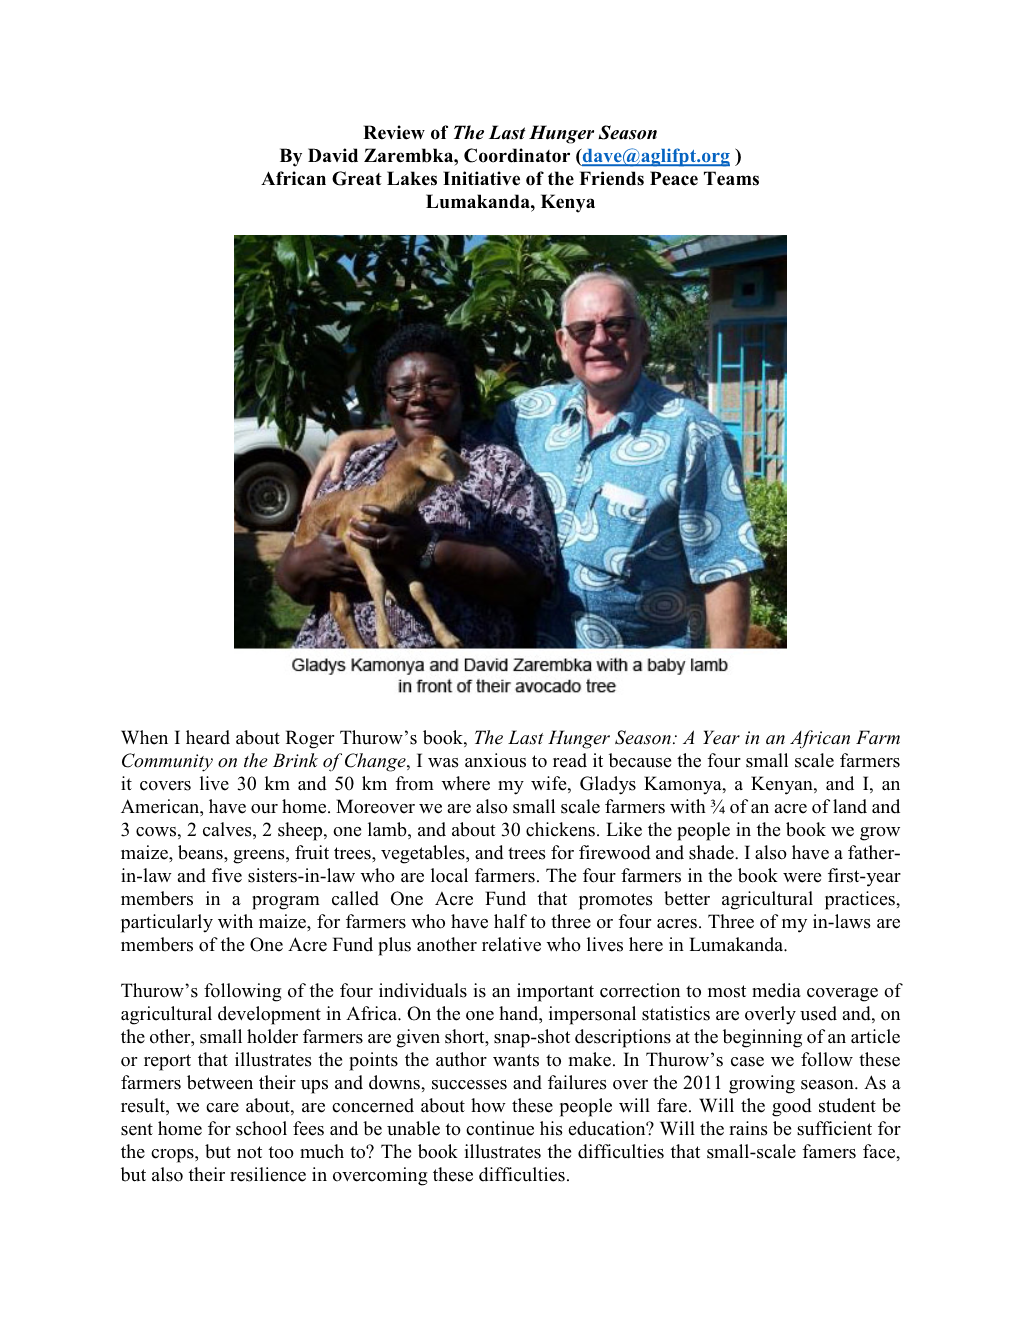 Review of the Last Hunger Season by David Zarembka, Coordinator (Dave@Aglifpt.Org ) African Great Lakes Initiative of the Friends Peace Teams Lumakanda, Kenya